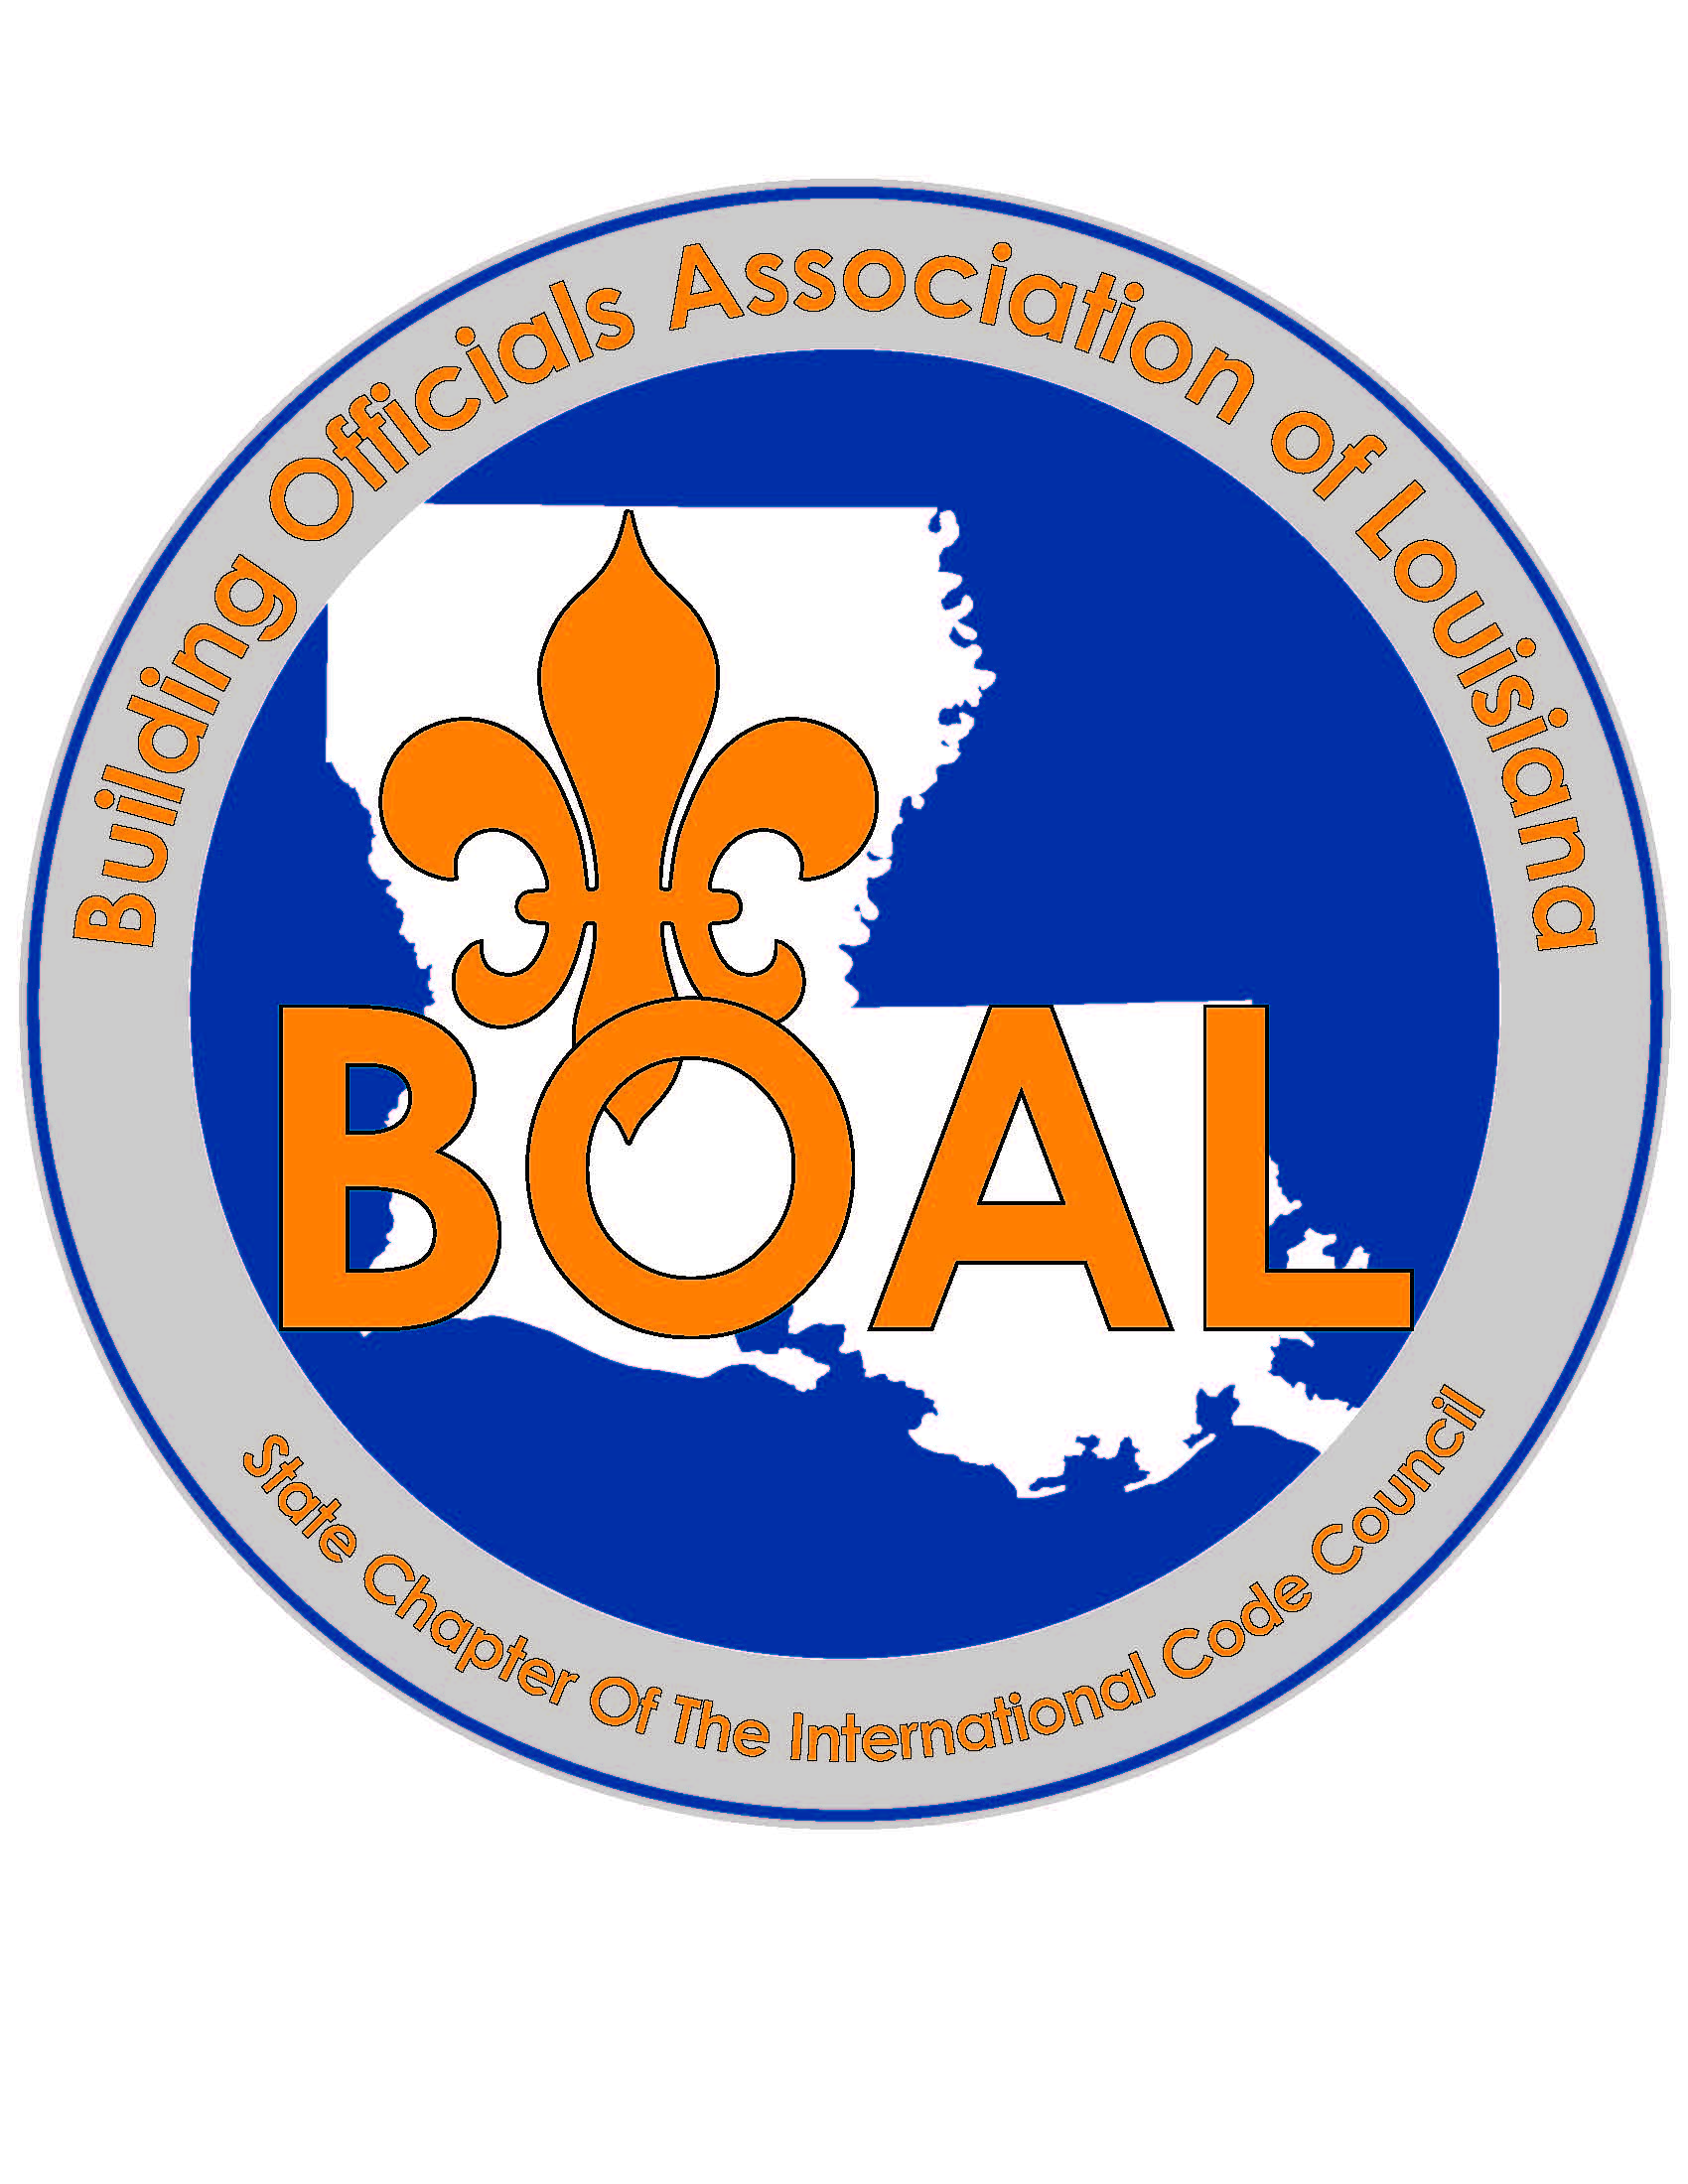 2019 Boal Annual Conference